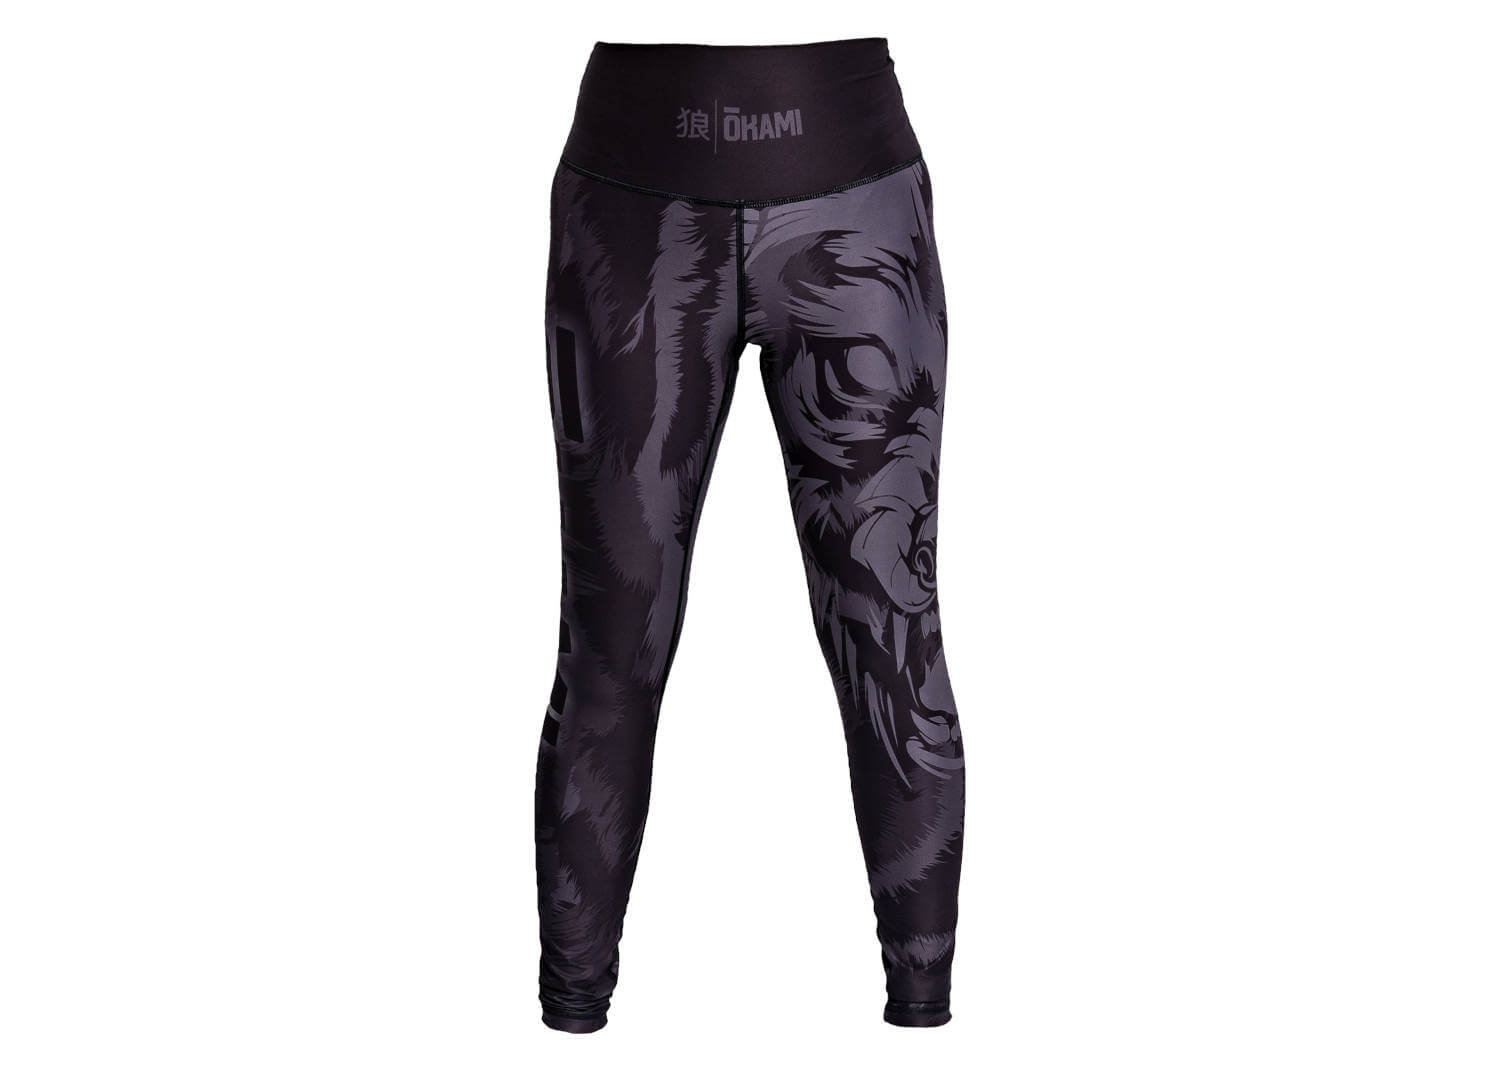 https://www.united-fightwear.com/images/product_images/original_images/Ladies/okamifightgear_Ladies_Spats_Wilderness01_web.jpg